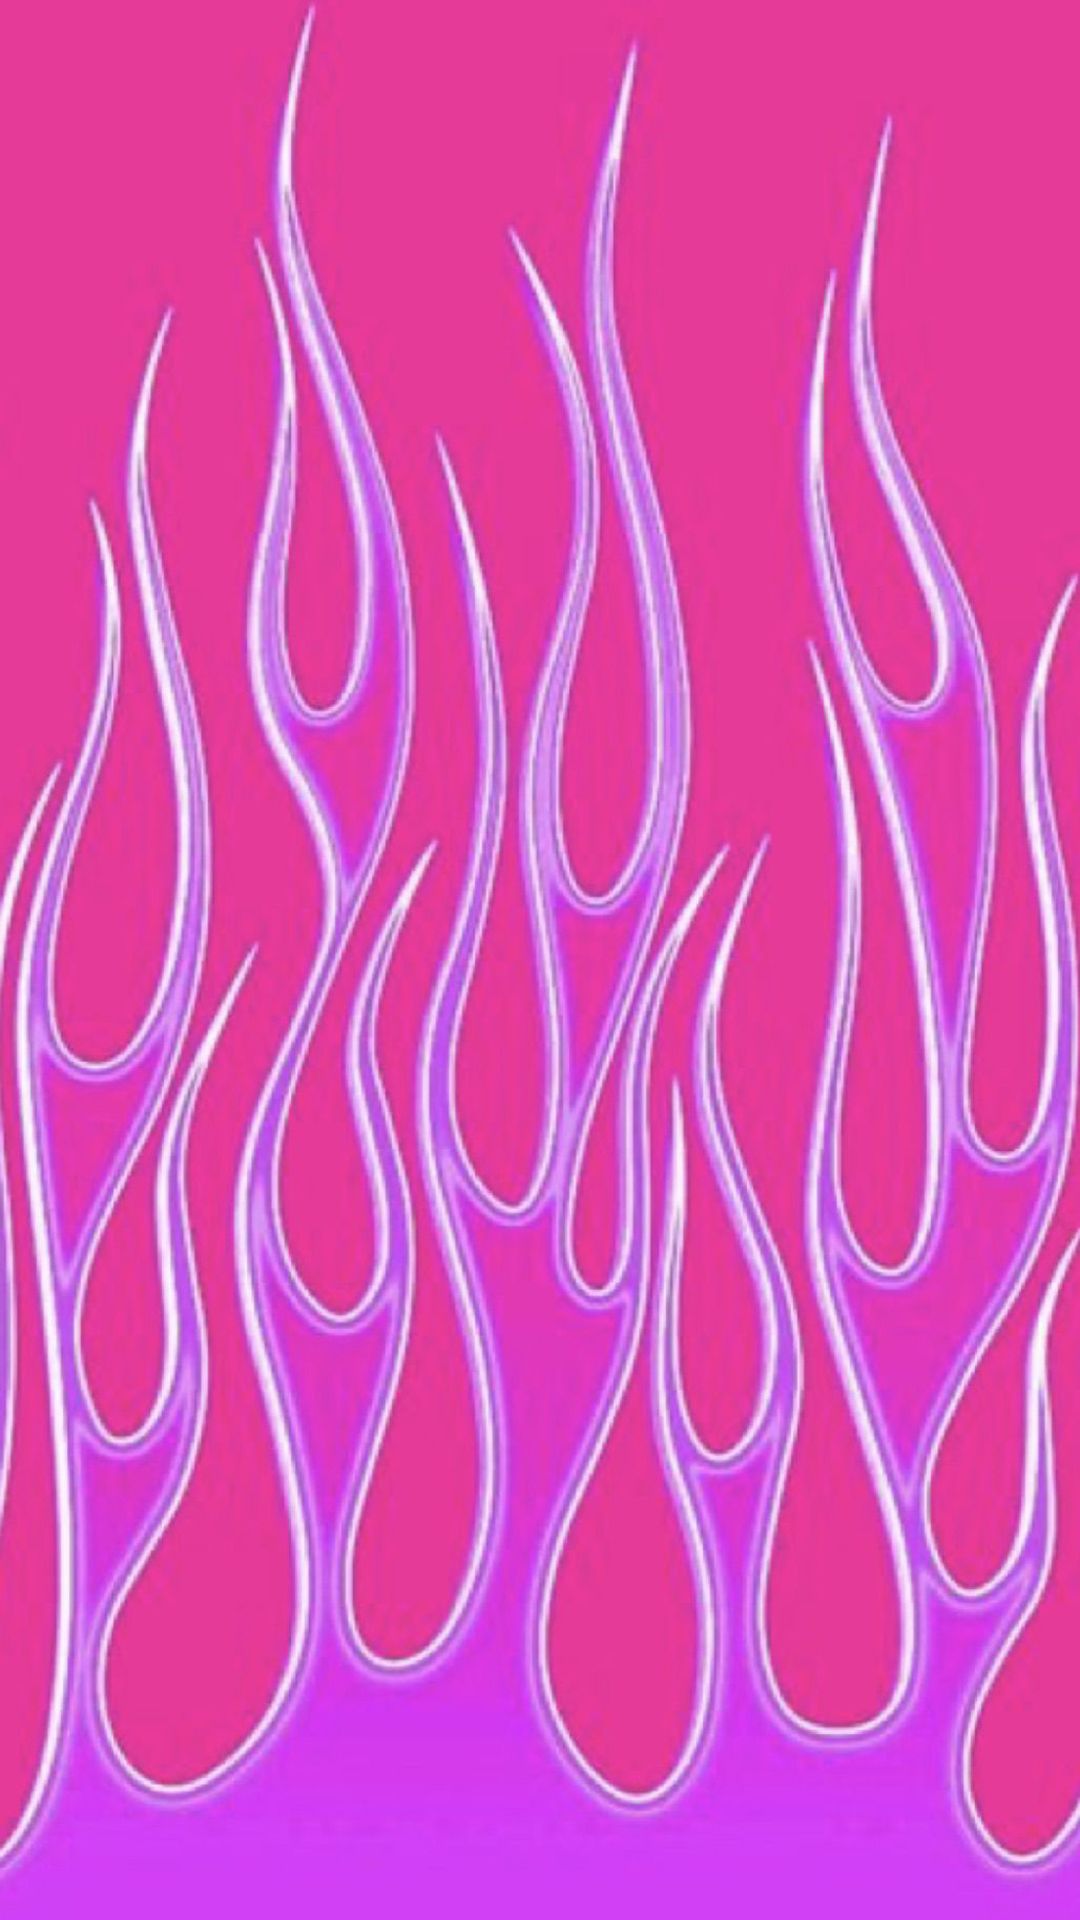 IPhone wallpaper hot pink flame with image resolution 1080x1920 pixel. You can make this wallpaper for your iPhone 5, 6, 7, 8, X backgrounds, Mobile Screensaver, or iPad Lock Screen - Fire